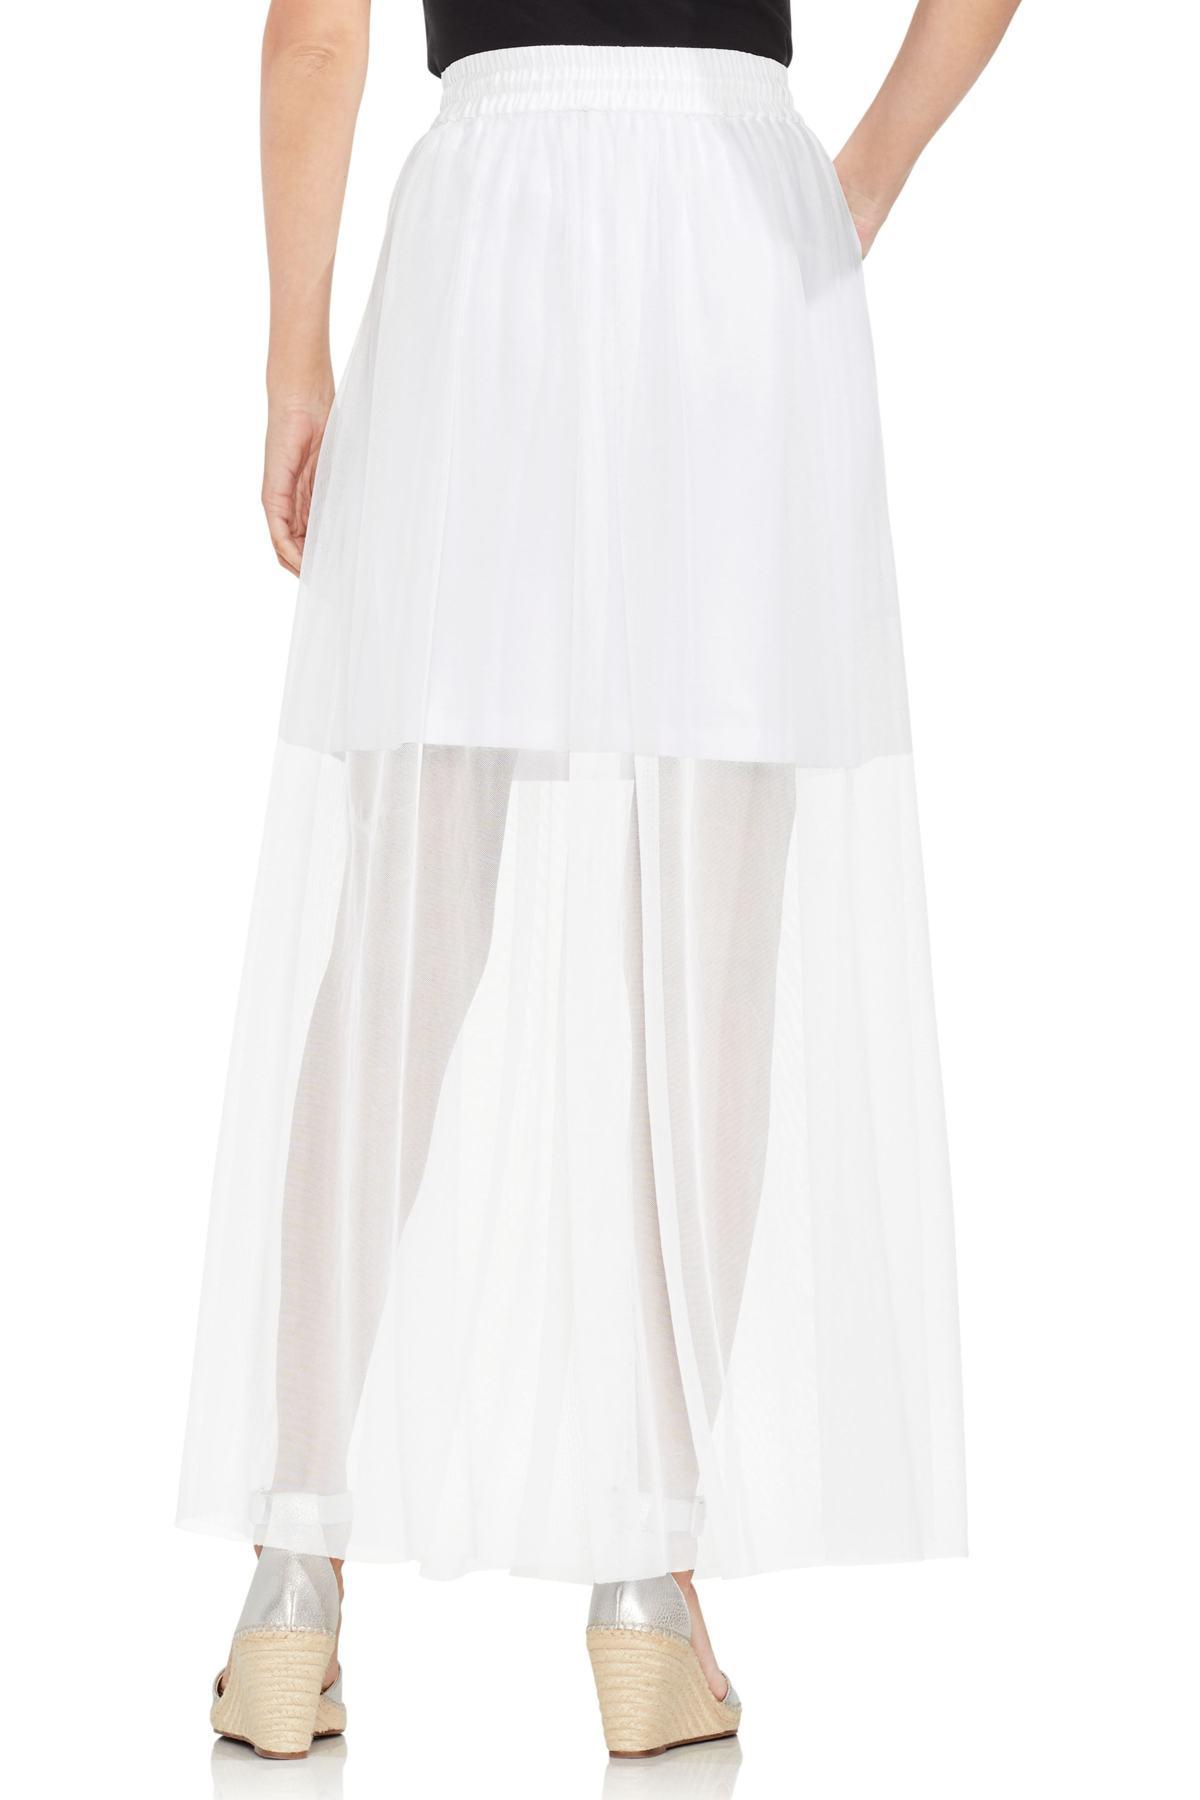 Lyst - Vince Camuto Side Tie Mesh Overlay Maxi Skirt in White - Save 22 ...